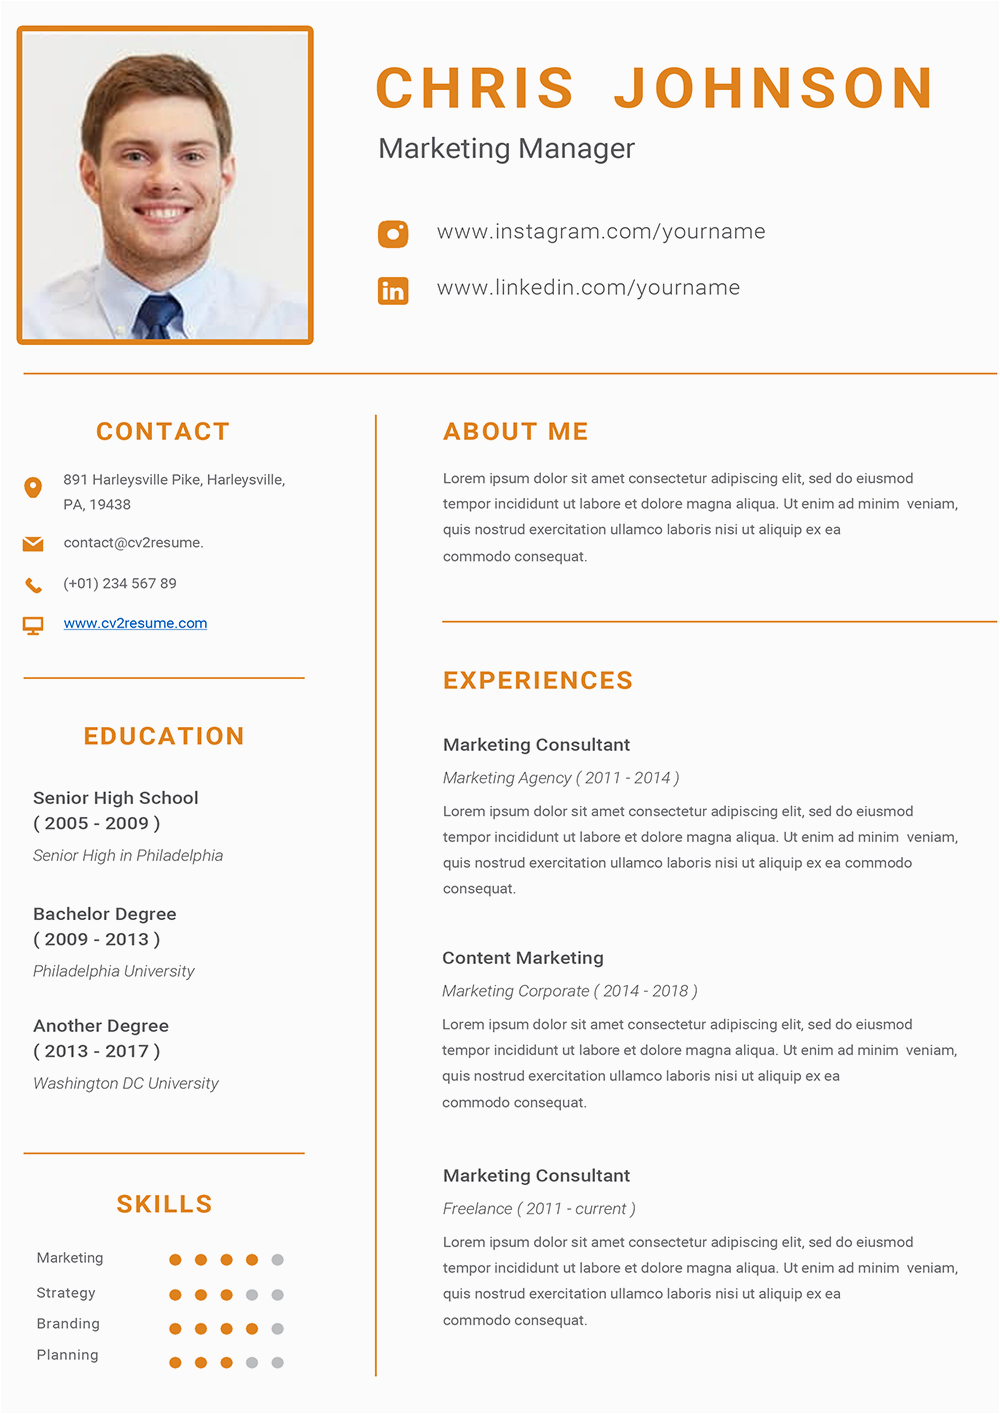 Best Professional Resume Templates Free Download top Clean Professional Resume Template Word format to Download